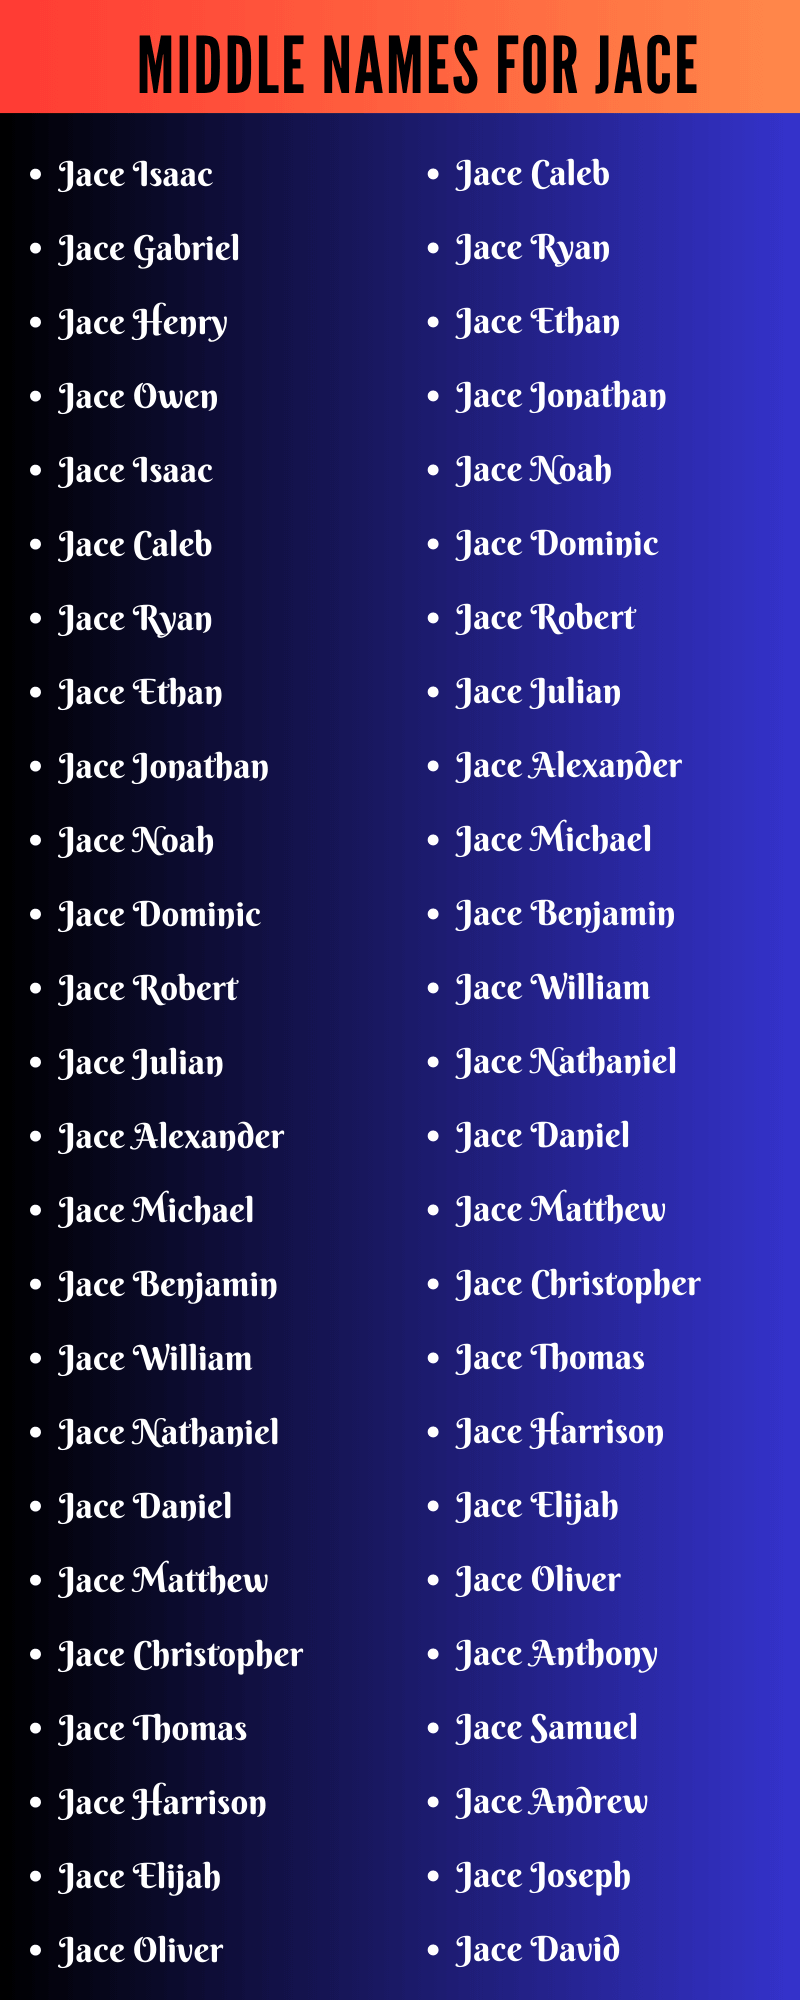 Middle Names For Jace